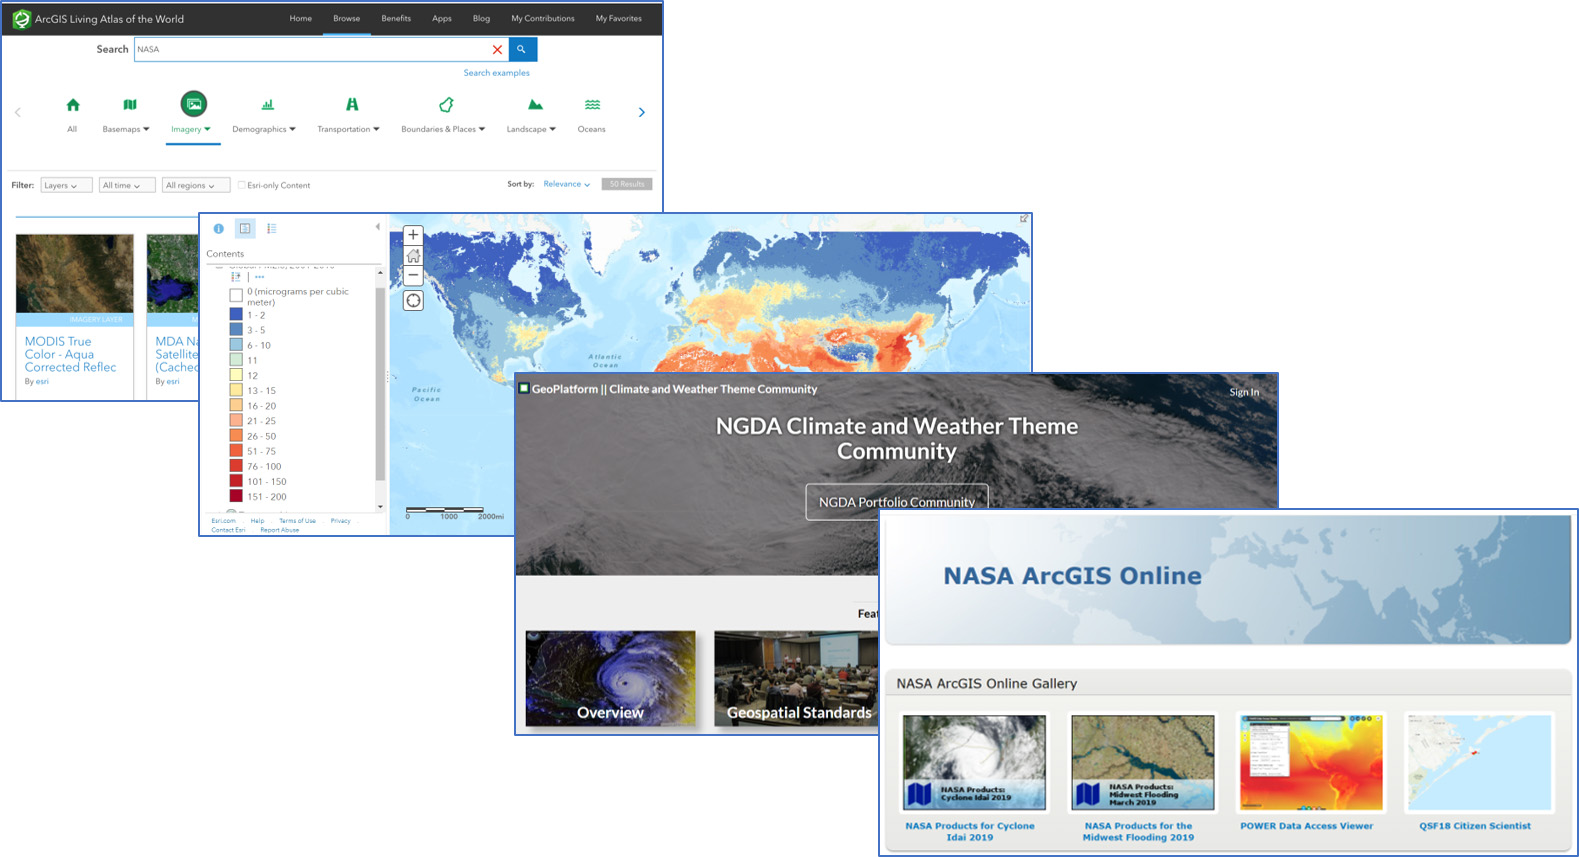 Screenshots of various GIS tools demonstrated in the webinar.